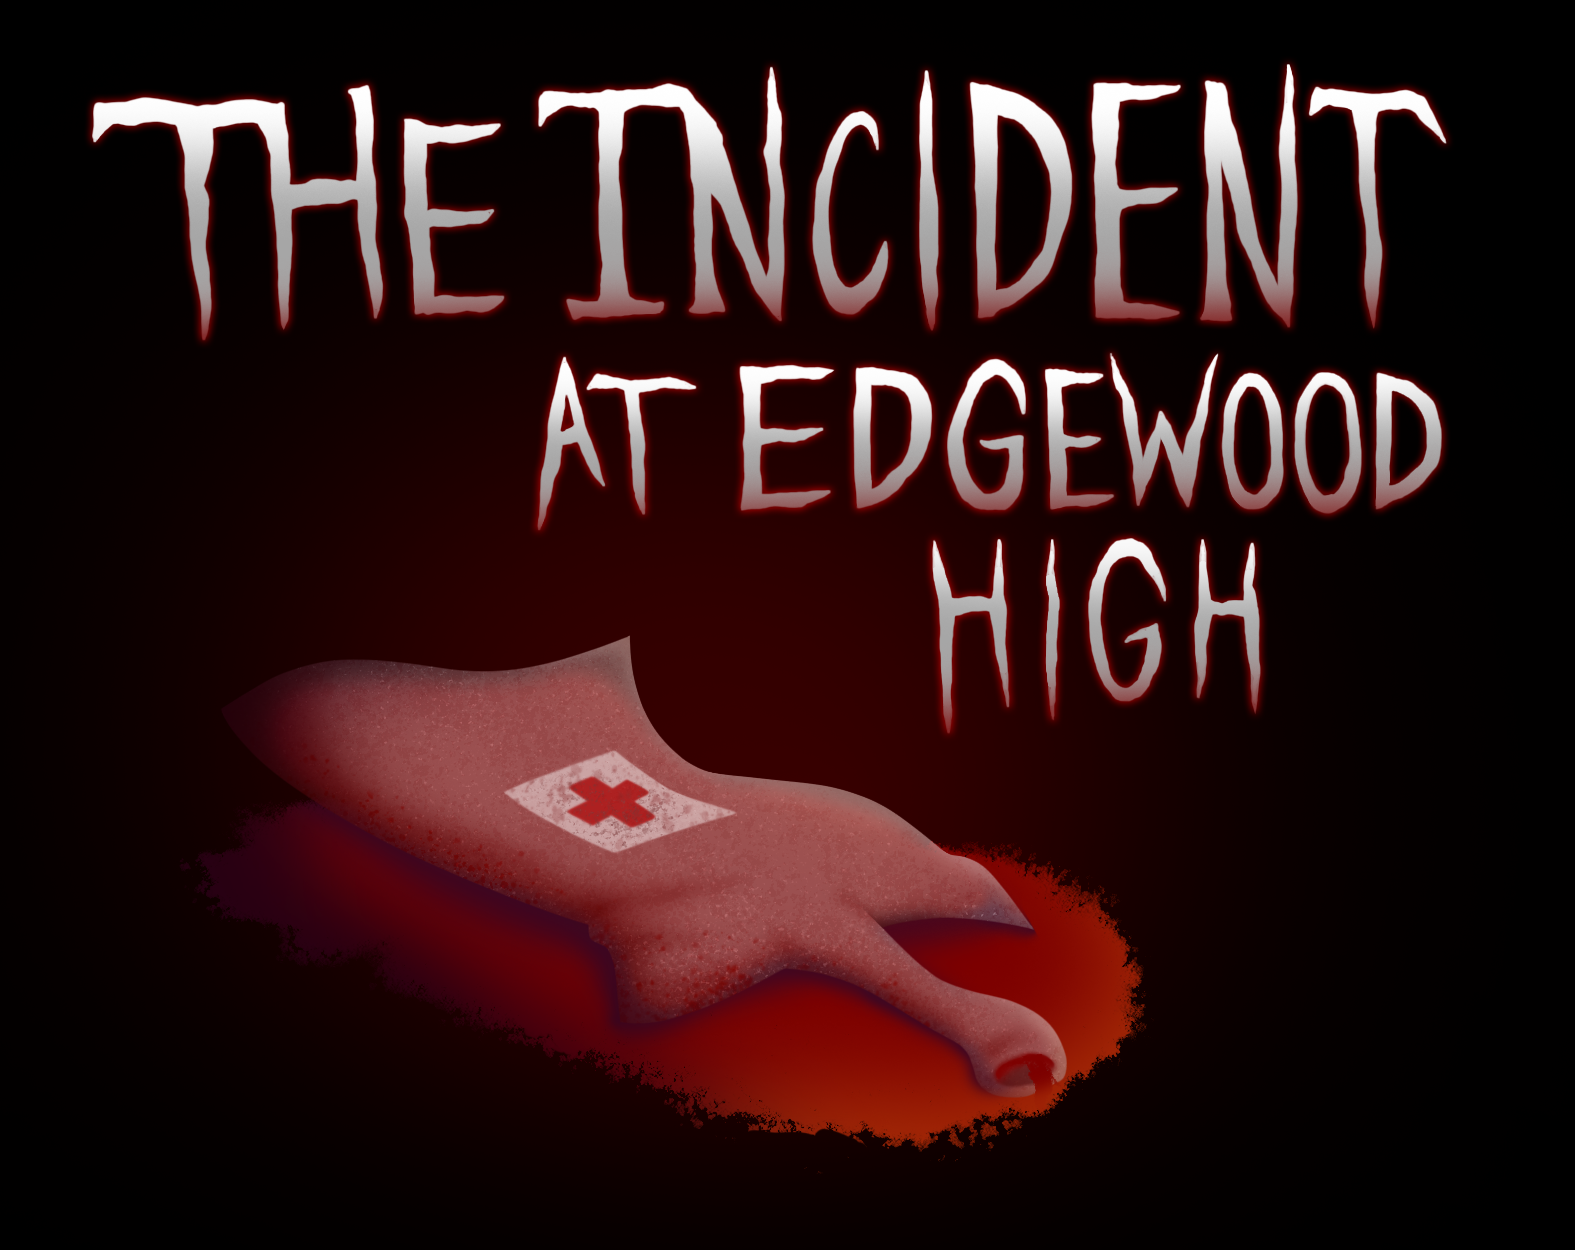 The Incident at Edgewood High